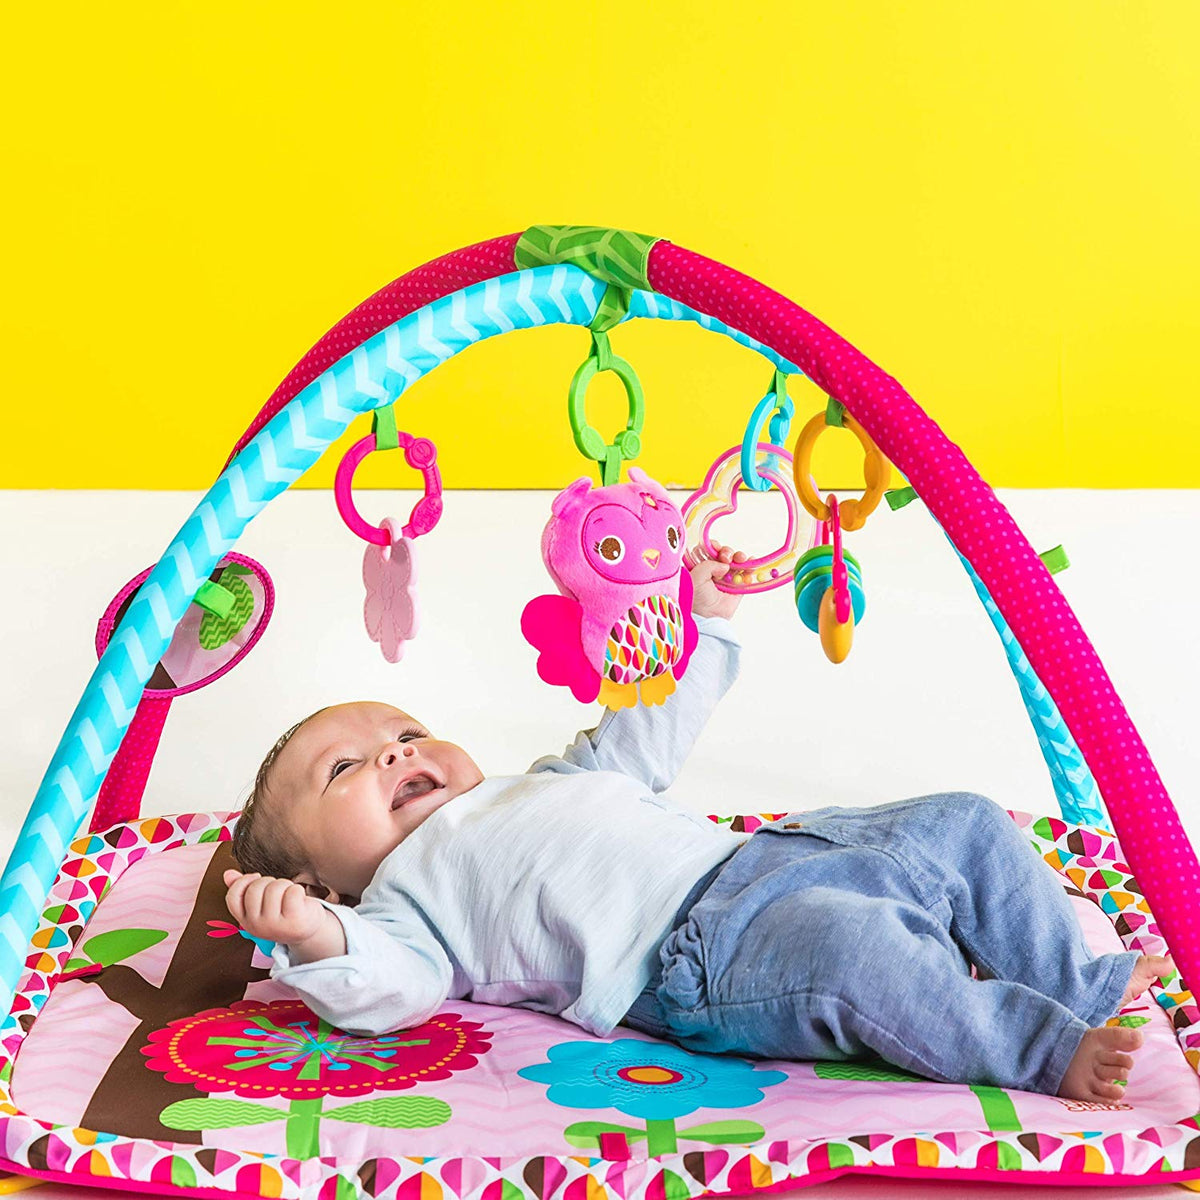 bright starts play mat pretty in pink